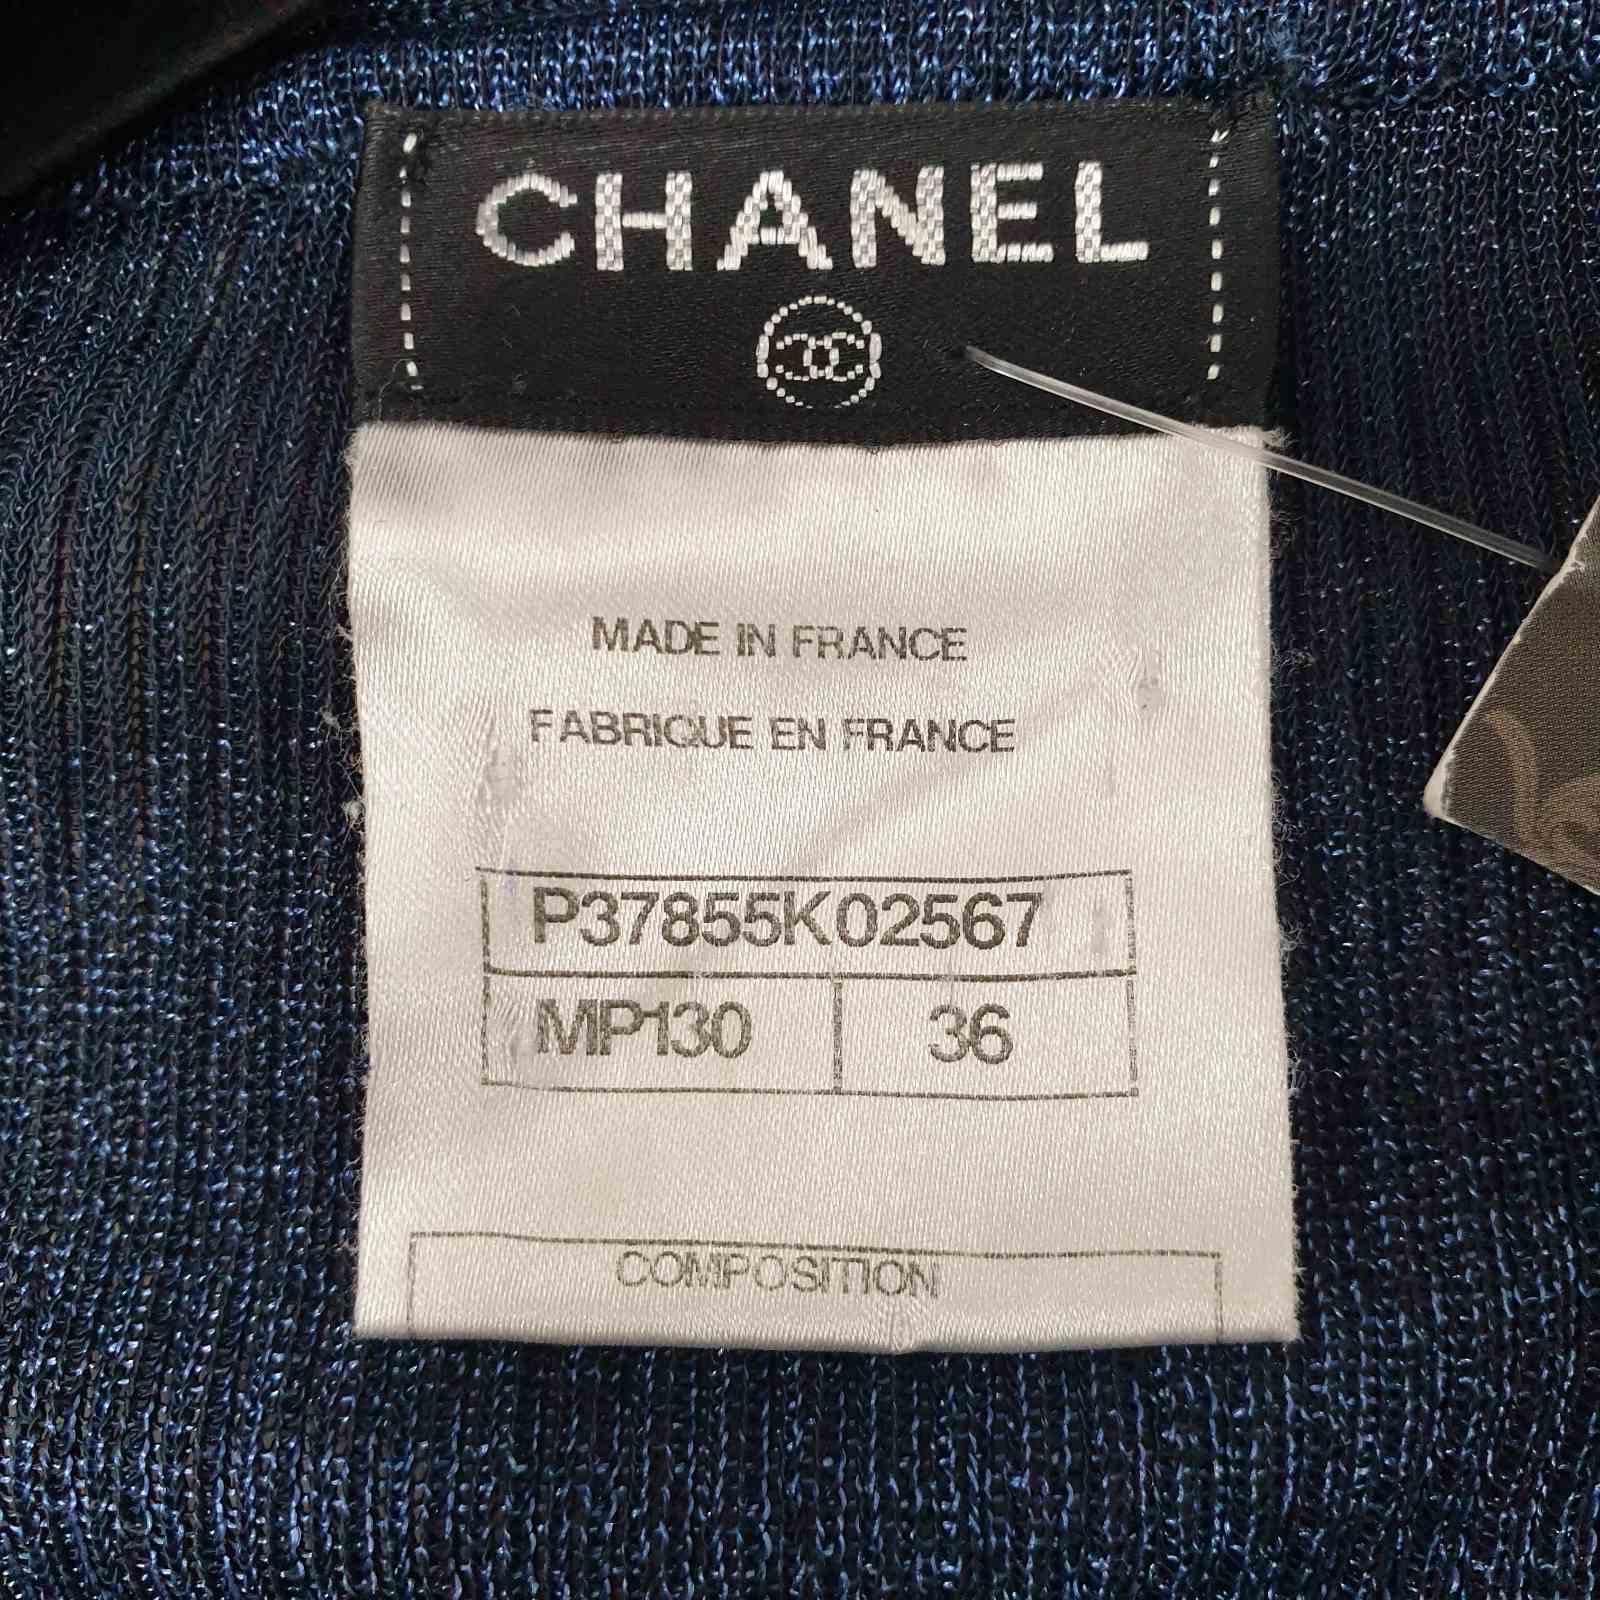 Chanel Navy Striped Knit Cardigan In Good Condition For Sale In Krakow, PL